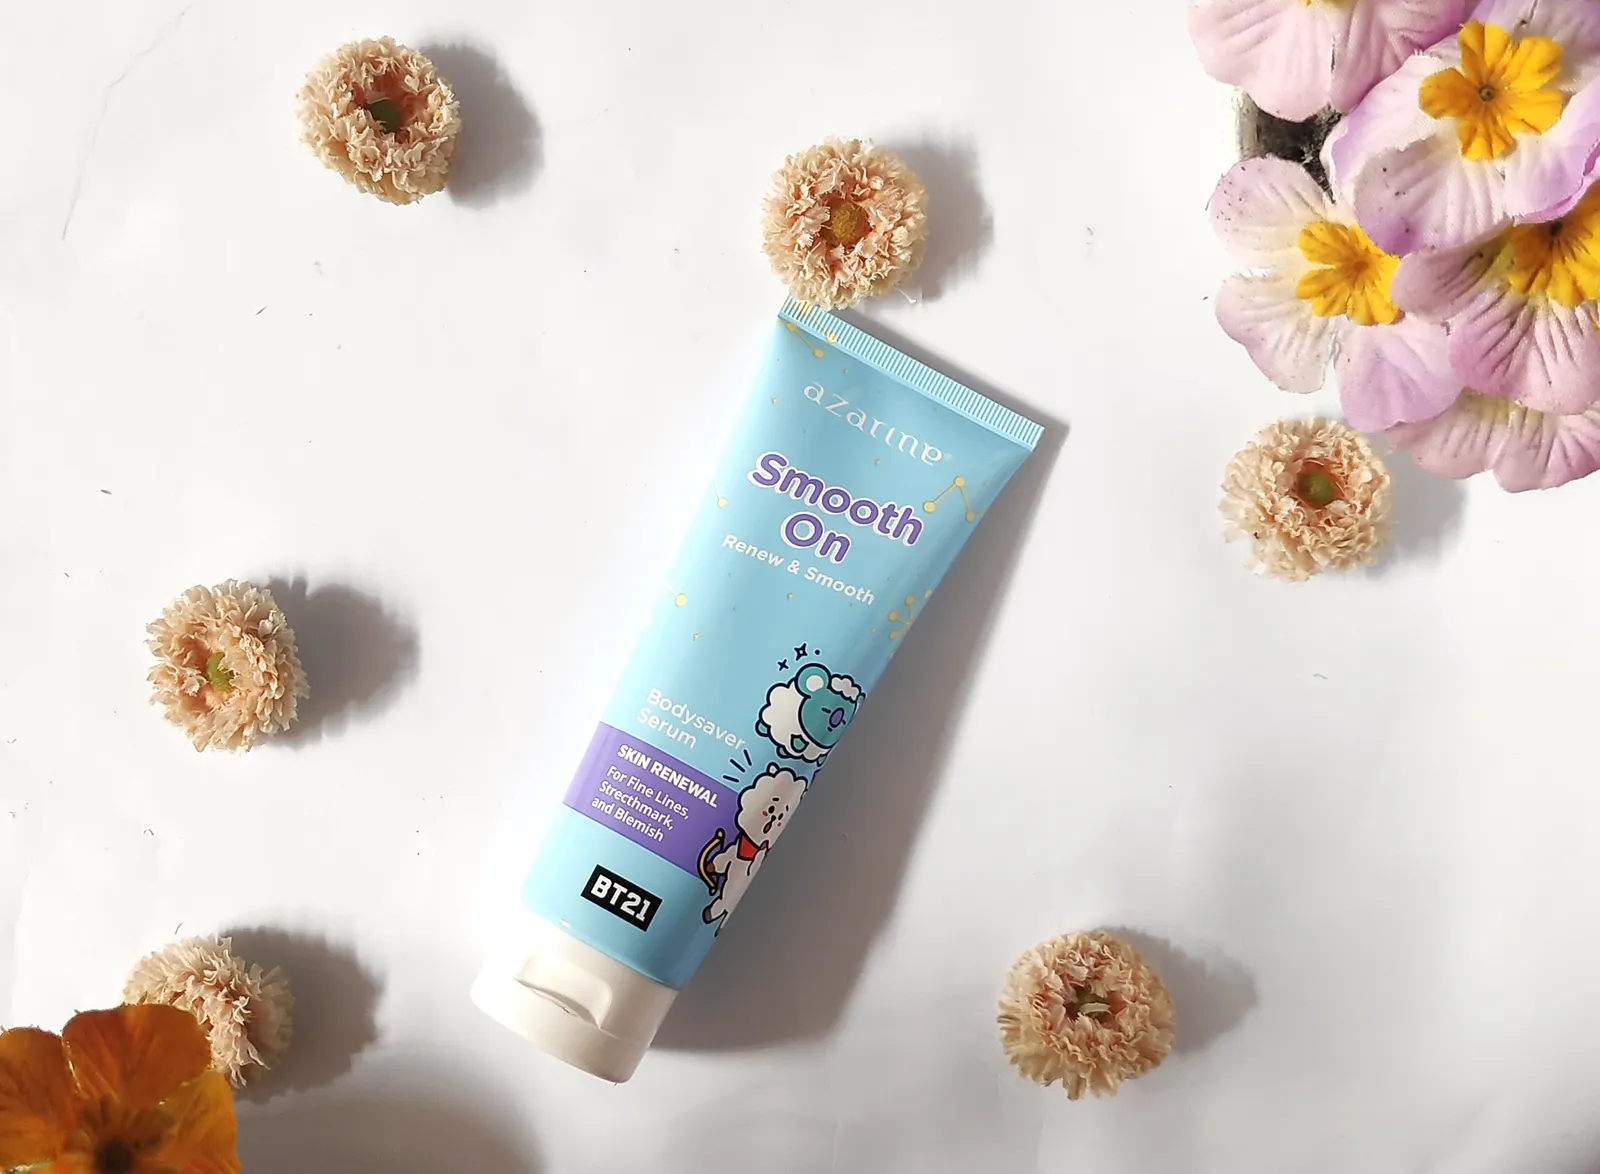 Review: Bodysaver Azarine: The First Local Body Care with BT21